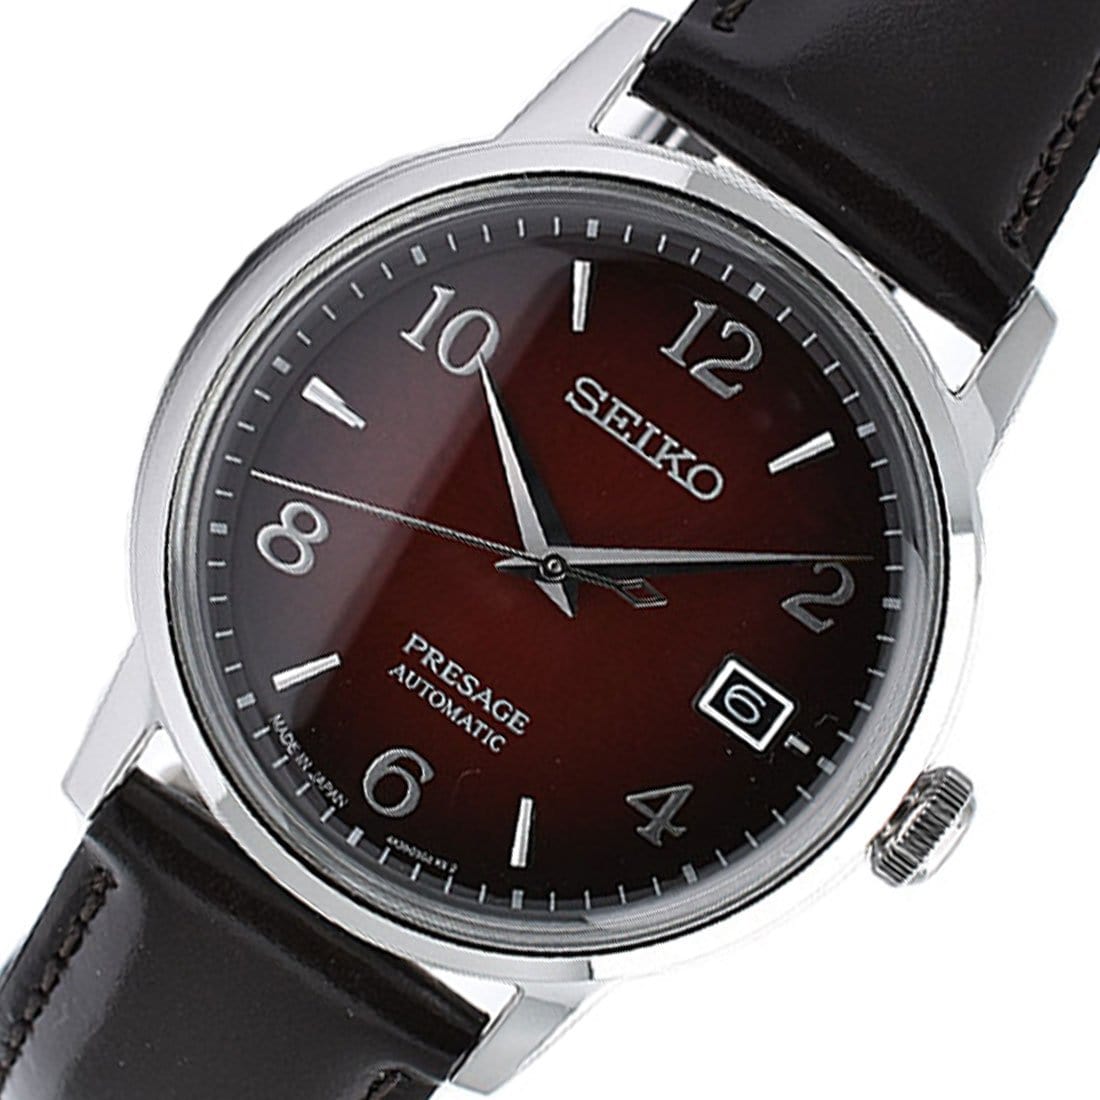 SARY163 Seiko Presage Automatic Cocktail Time Leather JDM Watch